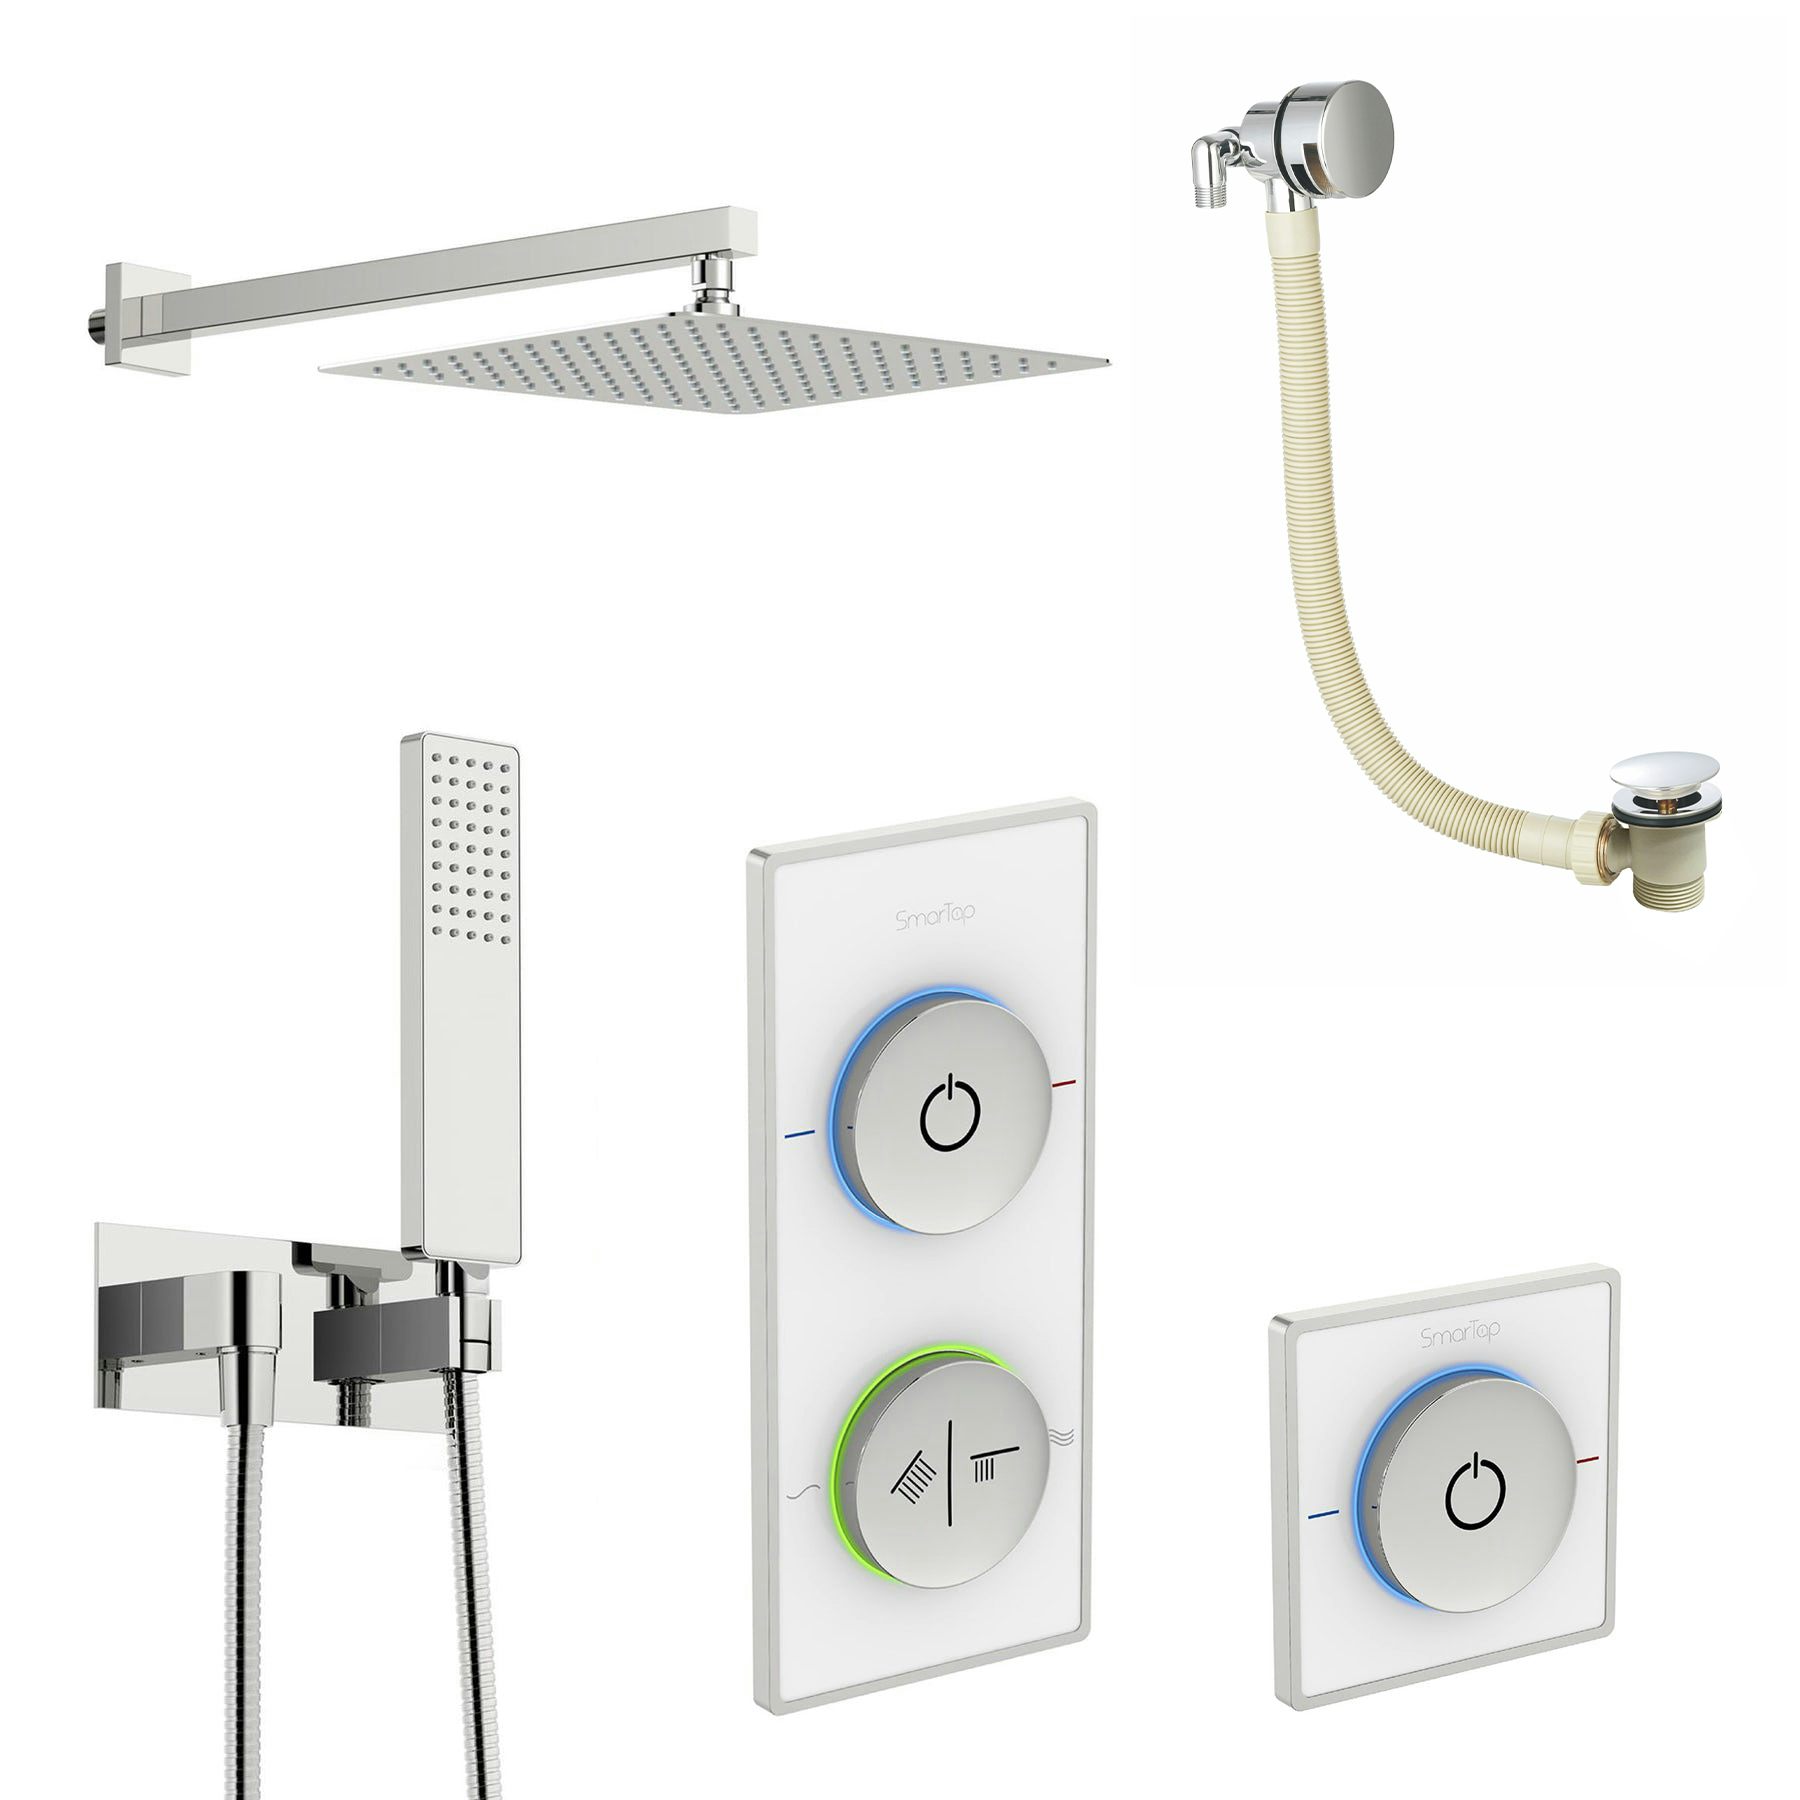 SmarTap white smart shower system with complete square wall shower outlet bath set